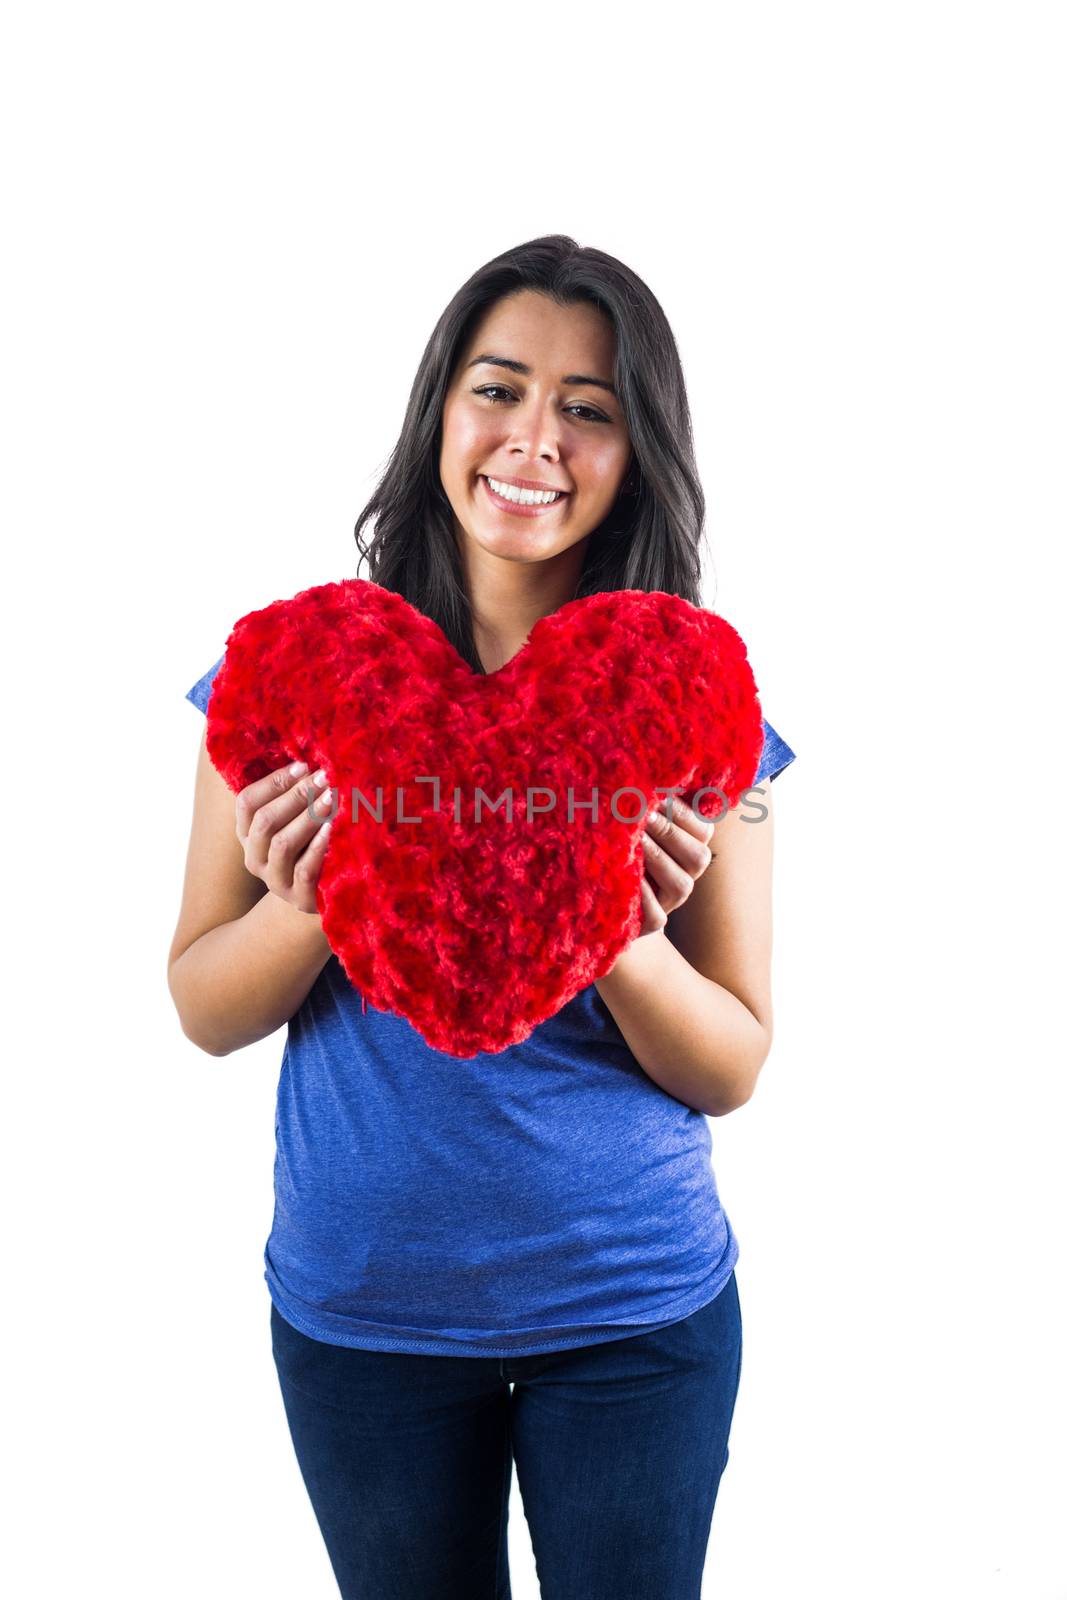 Smiling woman holding a heart shaped pillow against a white background